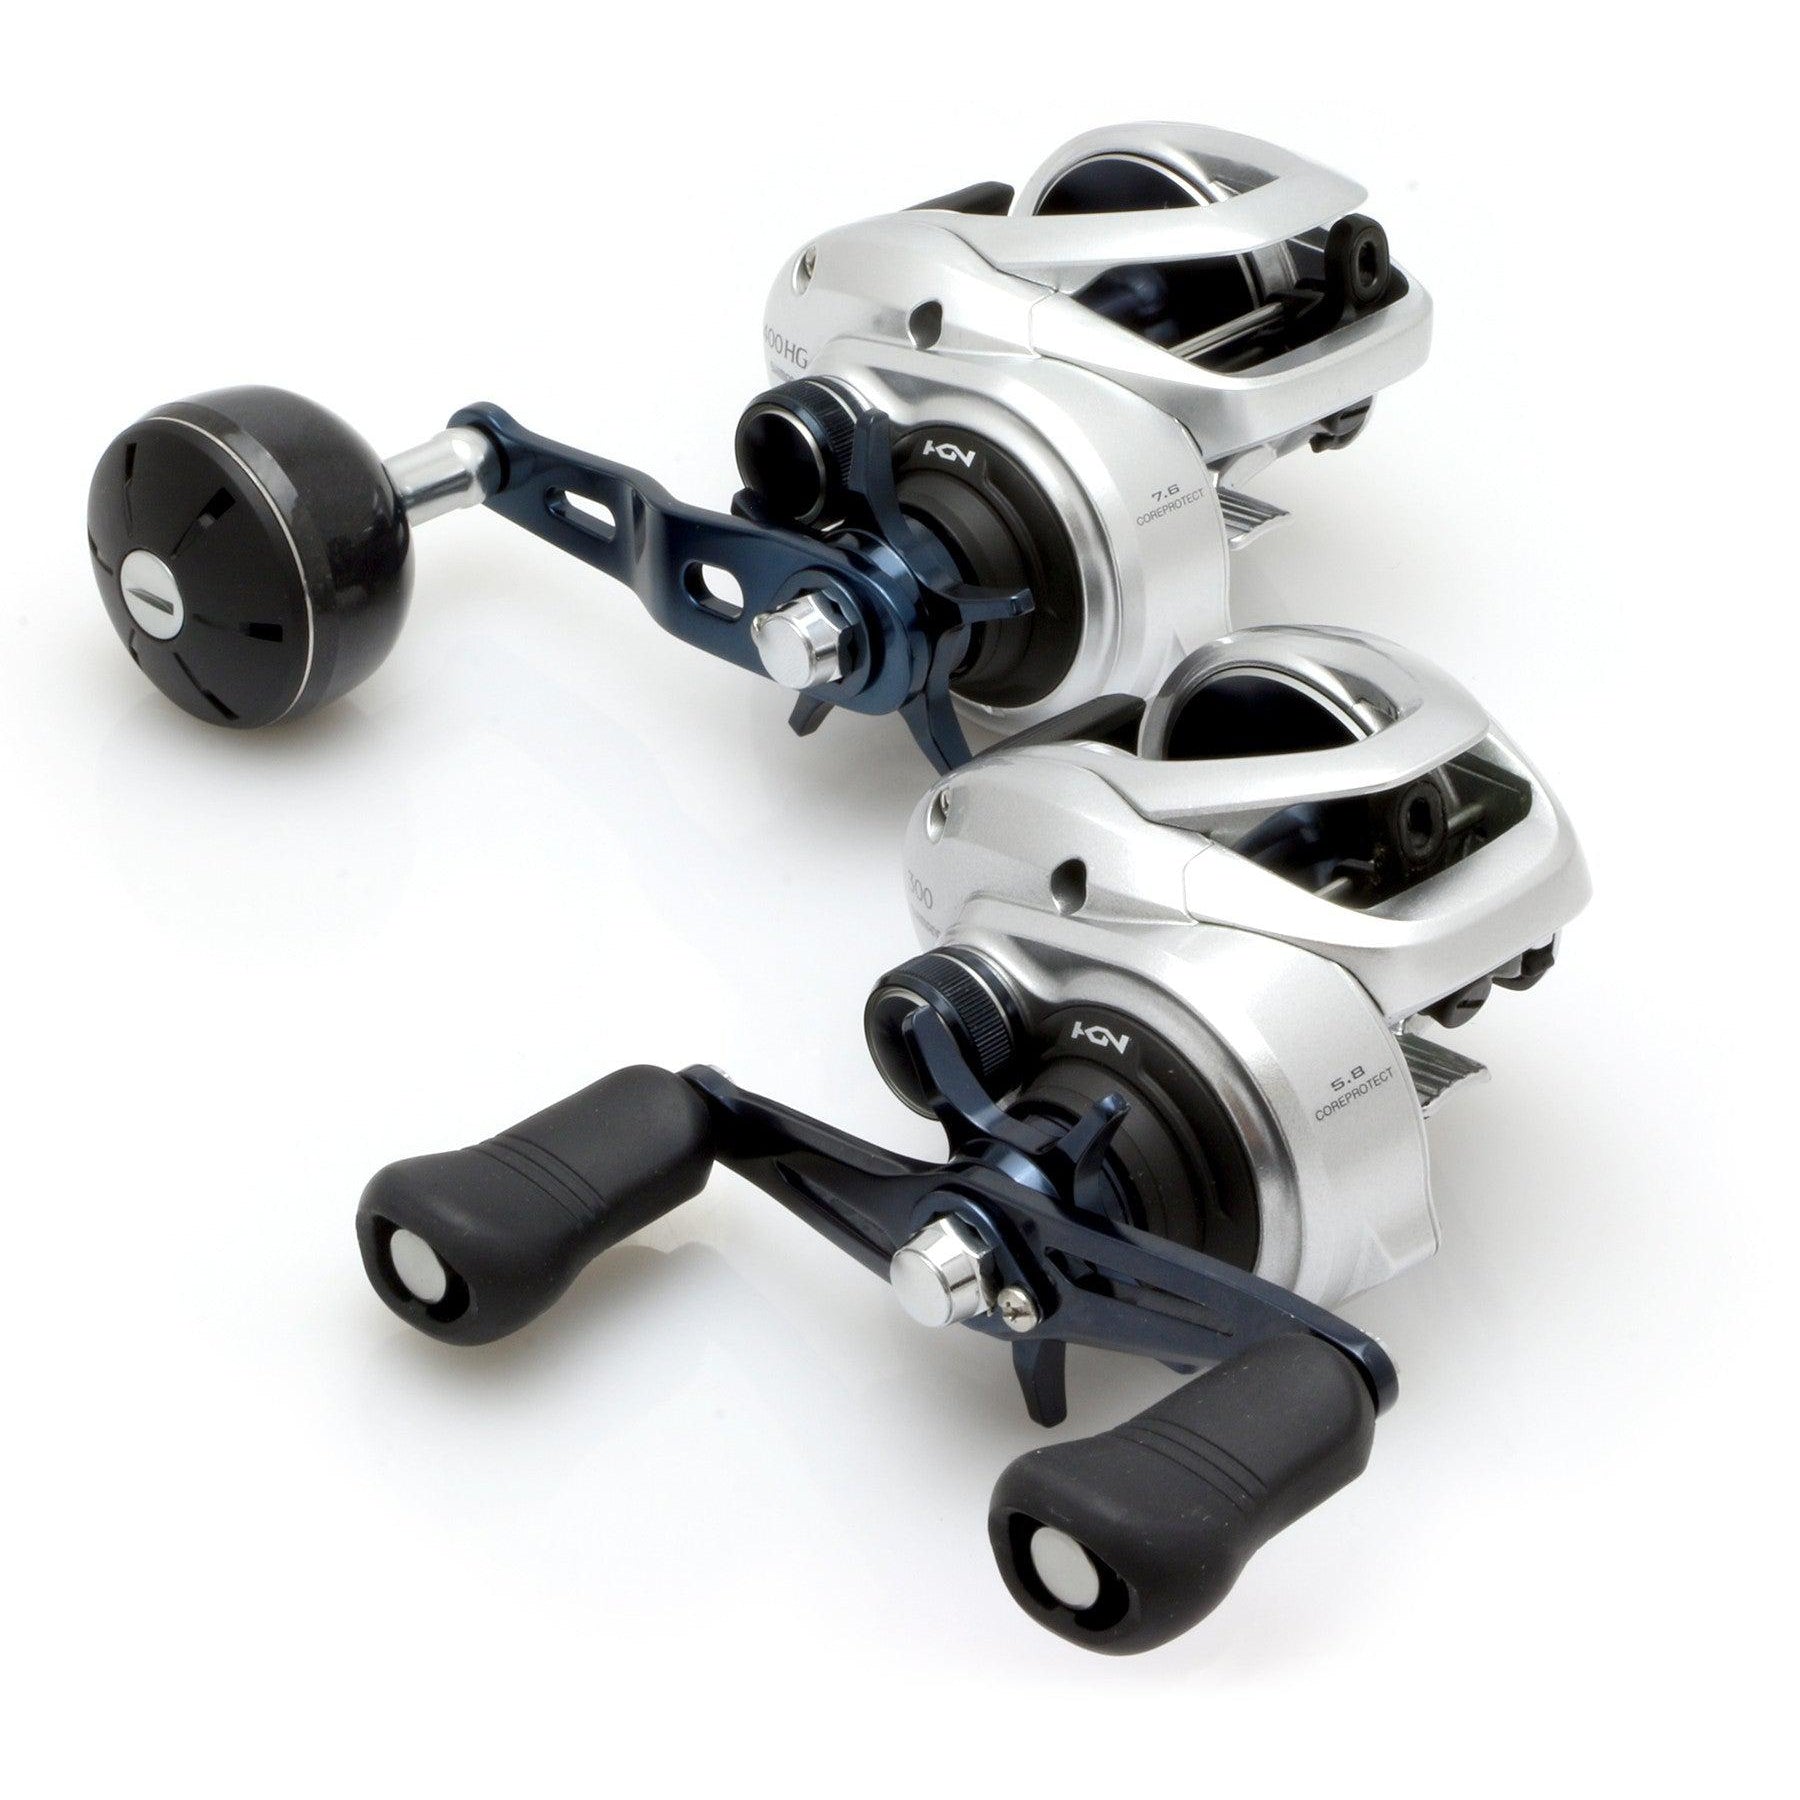 Pro Gear Fishing Reel ** 251 ** Made In The USA ****************************